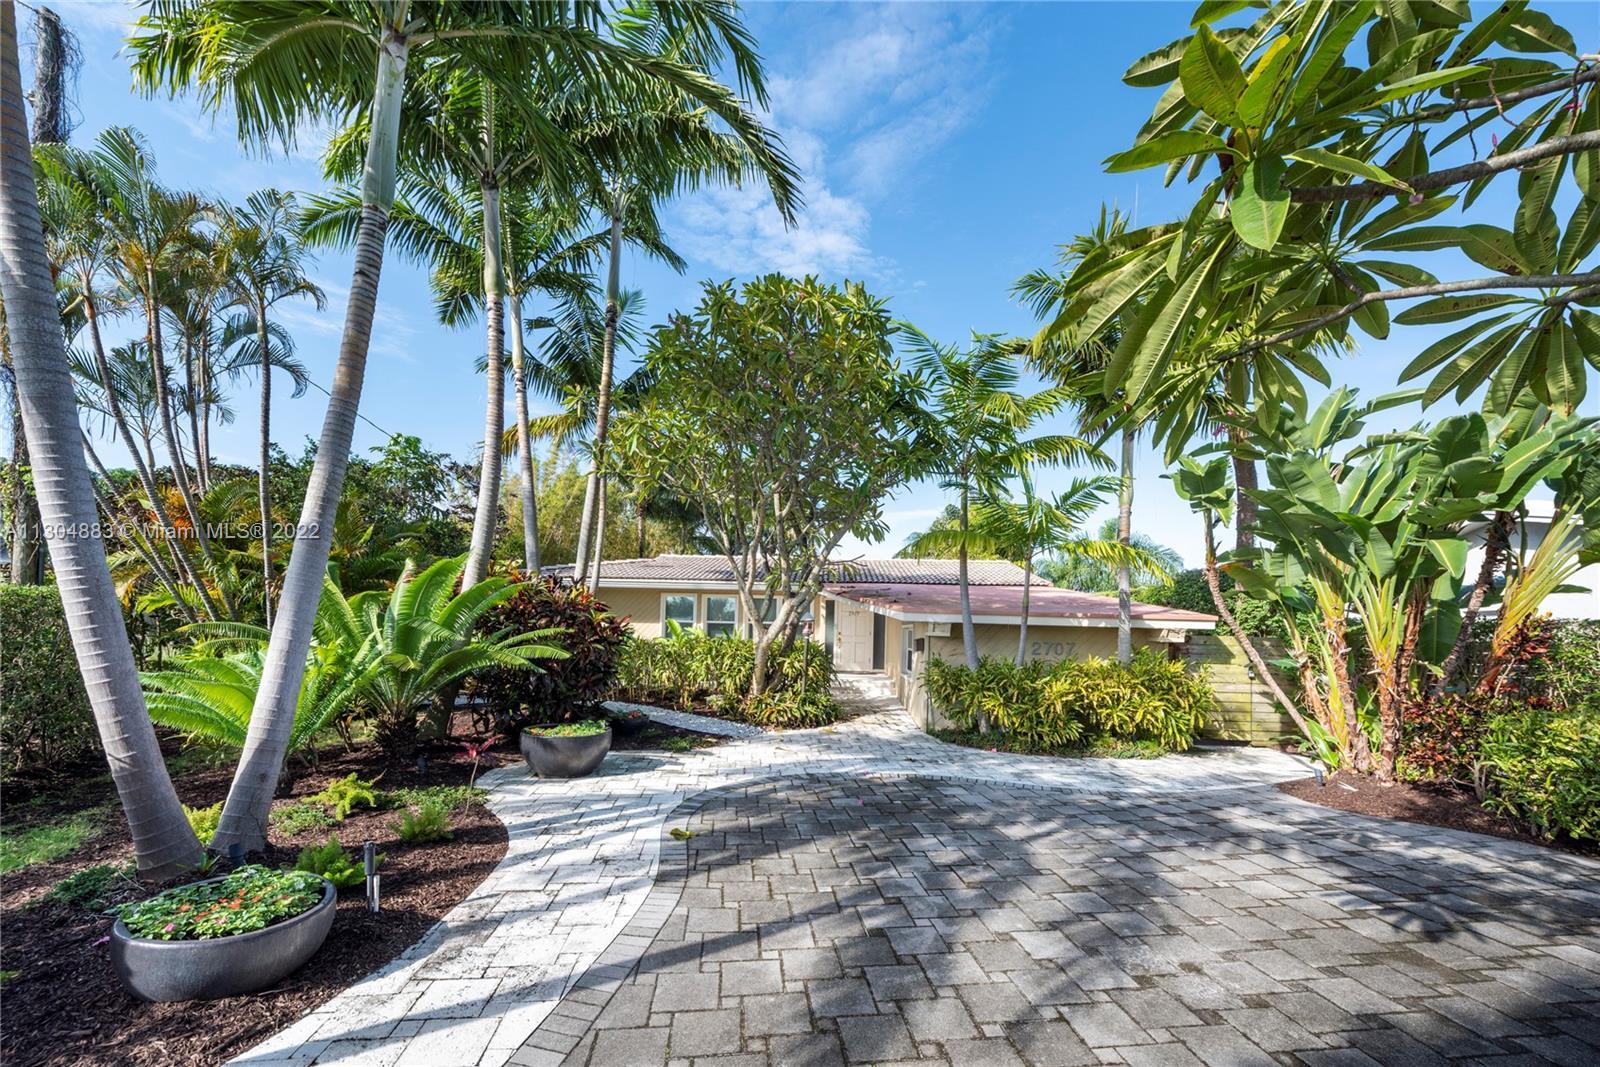 This 3 bedroom 3 bath, w/den, is a  dazzling, waterfront, pool home on a big lot. This is a rare opp